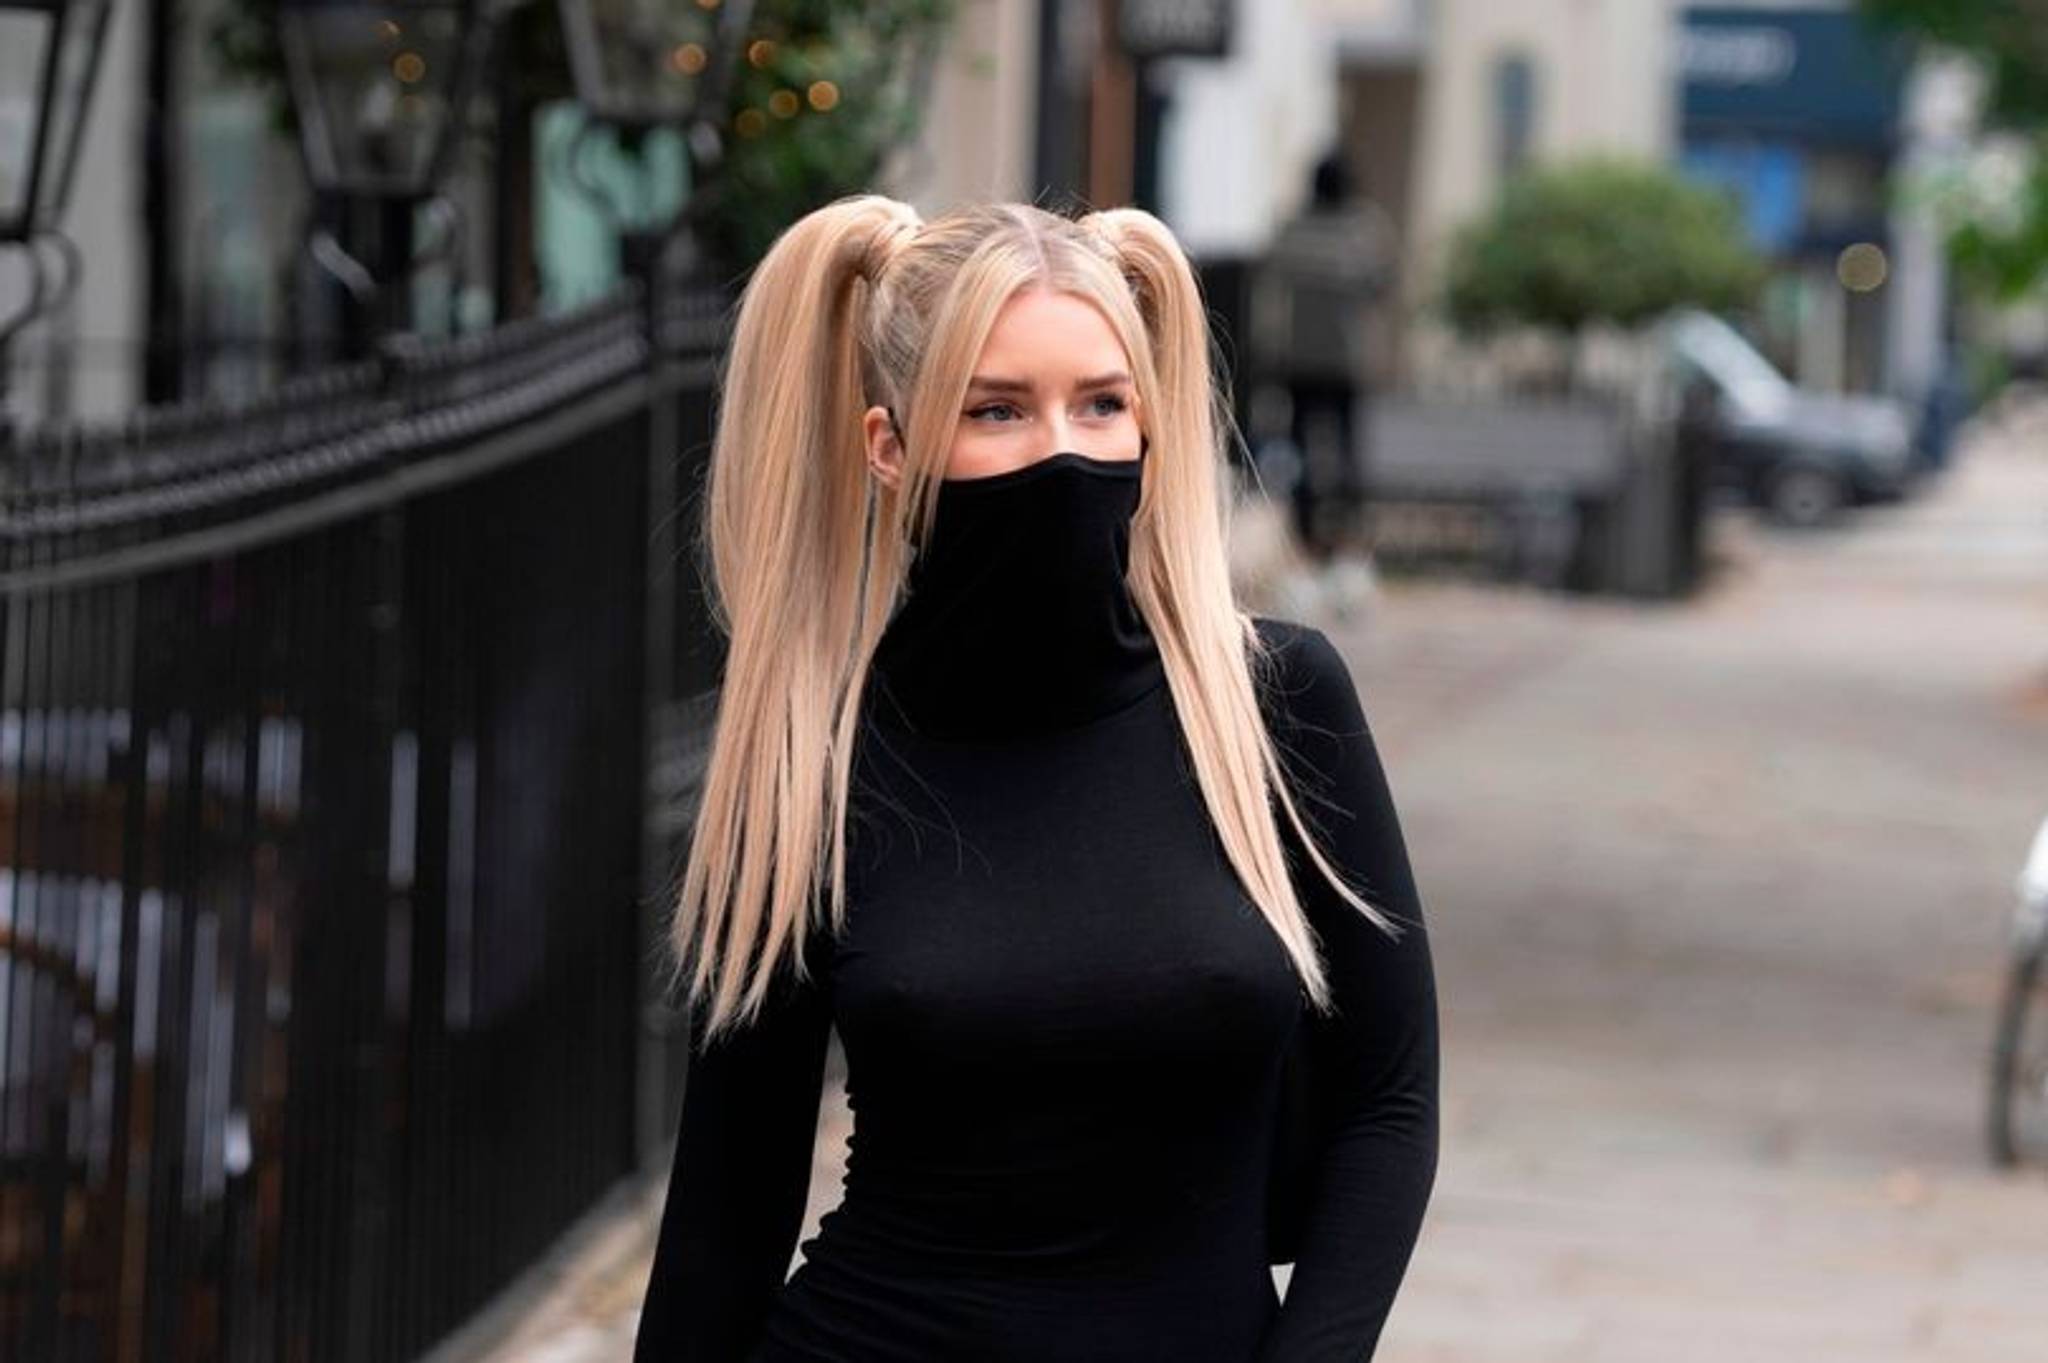 Face mask dress brings PPE to high street fashion